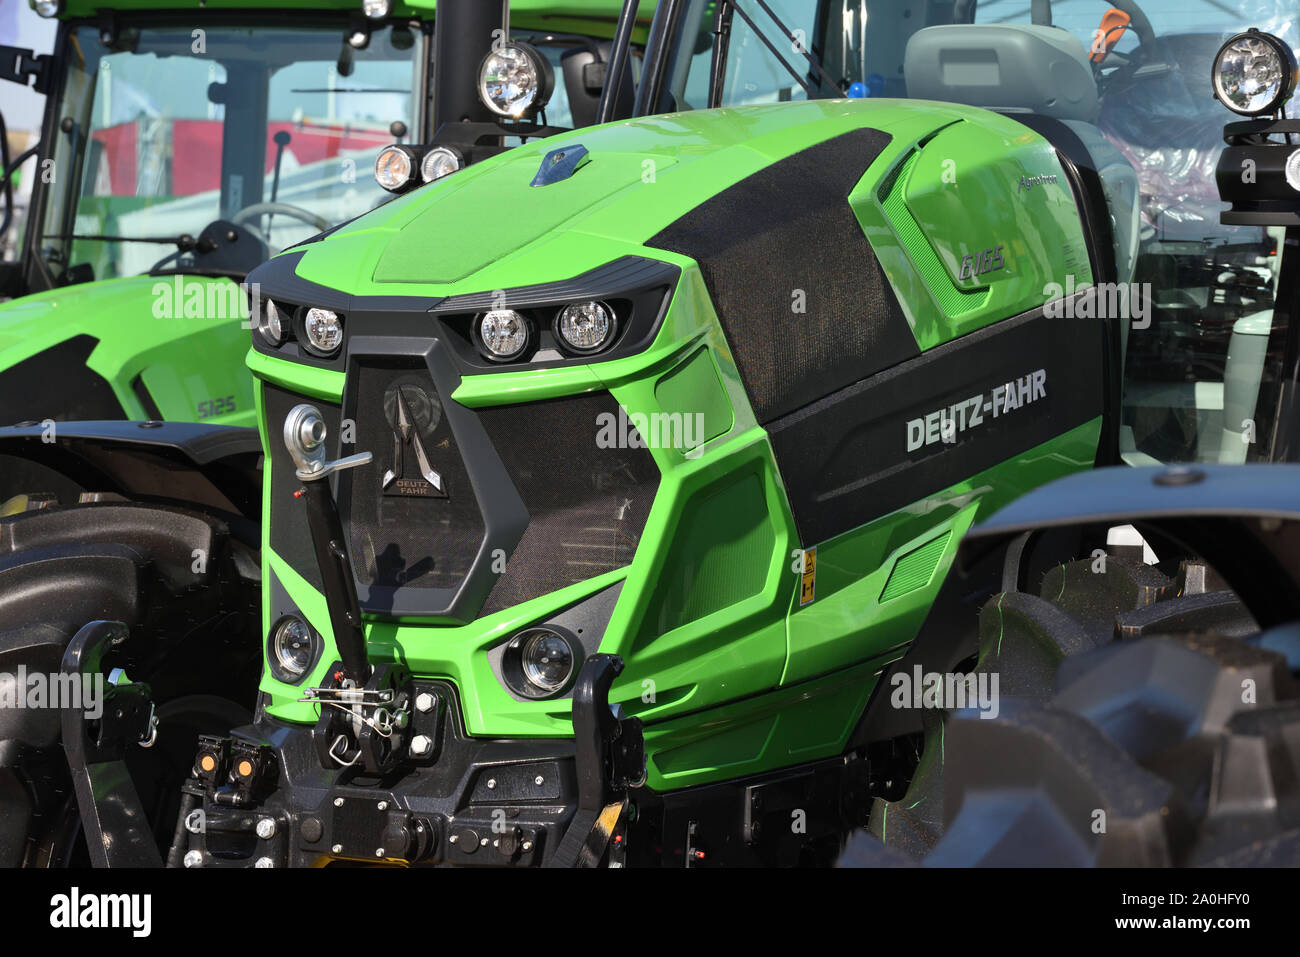 Kaunas, Lithuania - April 04: Deutz-Fahr tractors and logo in Kaunas on April 04, 2019. Deutz-Fahr is a brand of tractors and other farm equipment Stock Photo